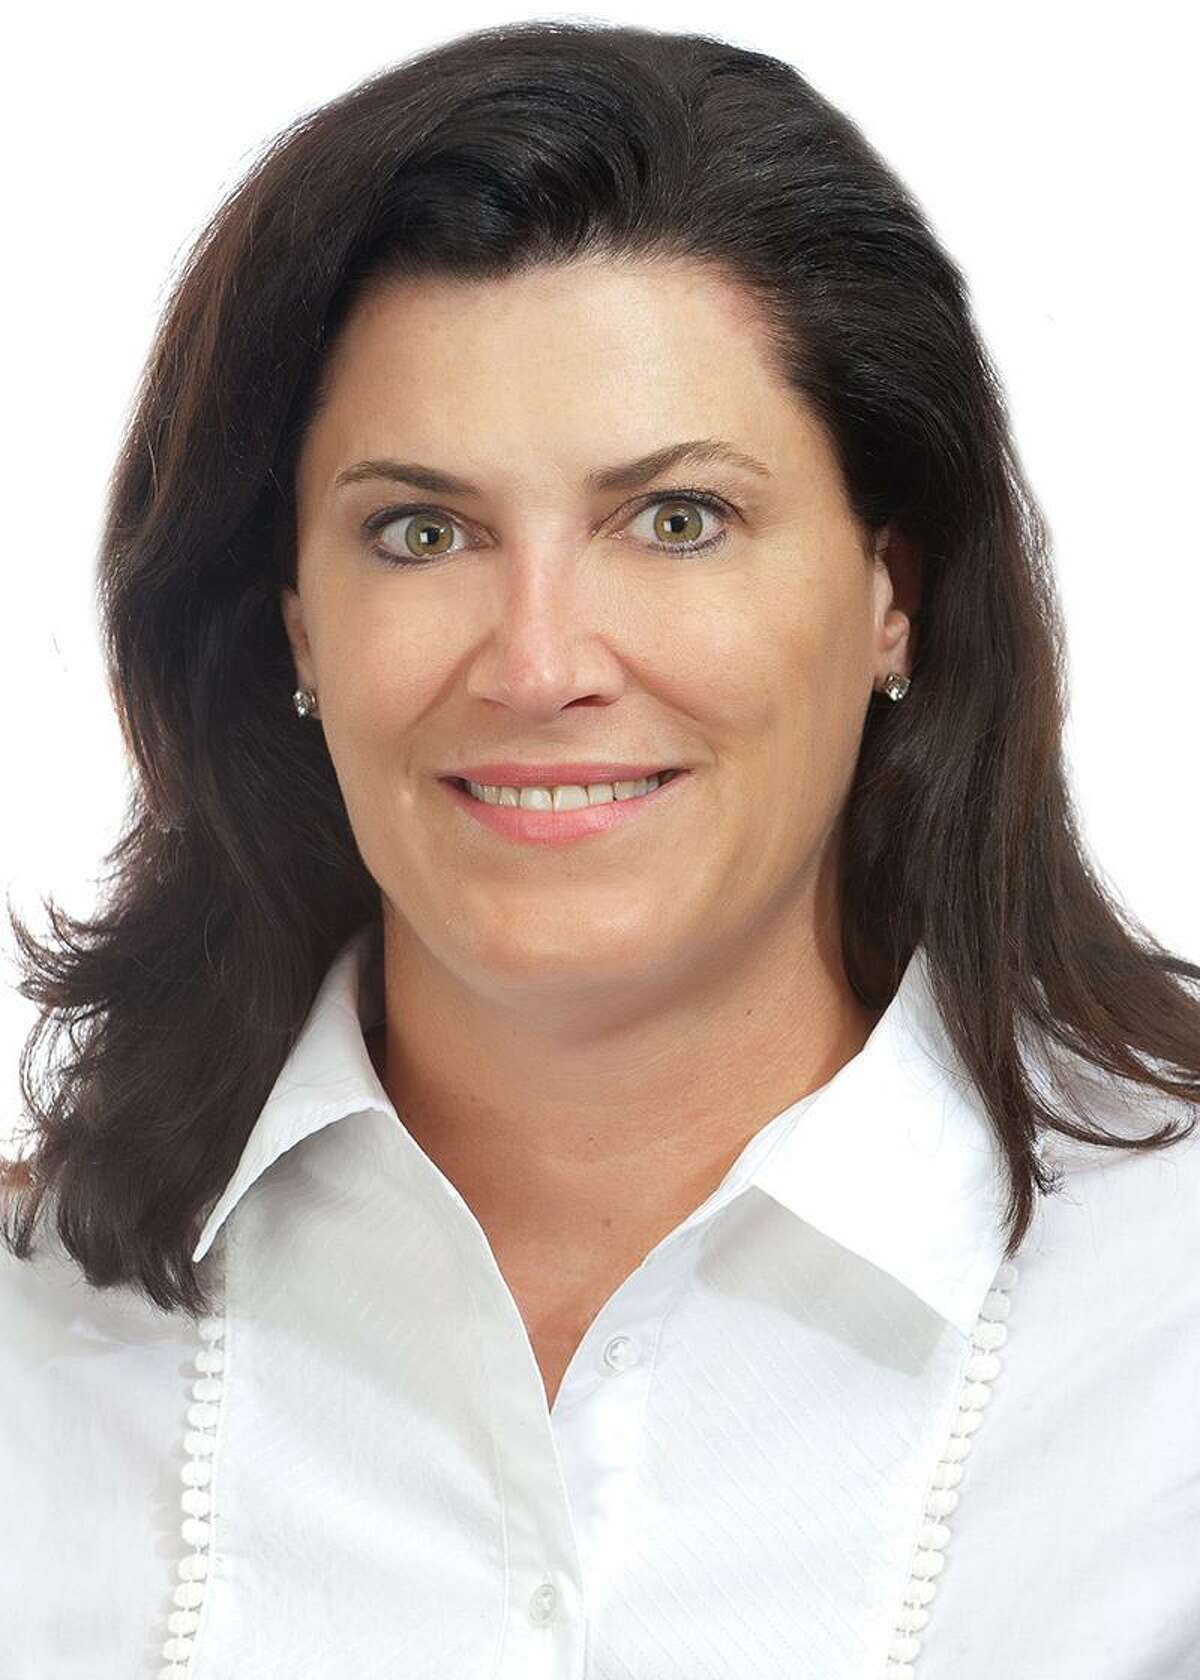 Elizabeth Bunk has been promoted to partner-in-charge of private client services for the south Texas region at Weaver.